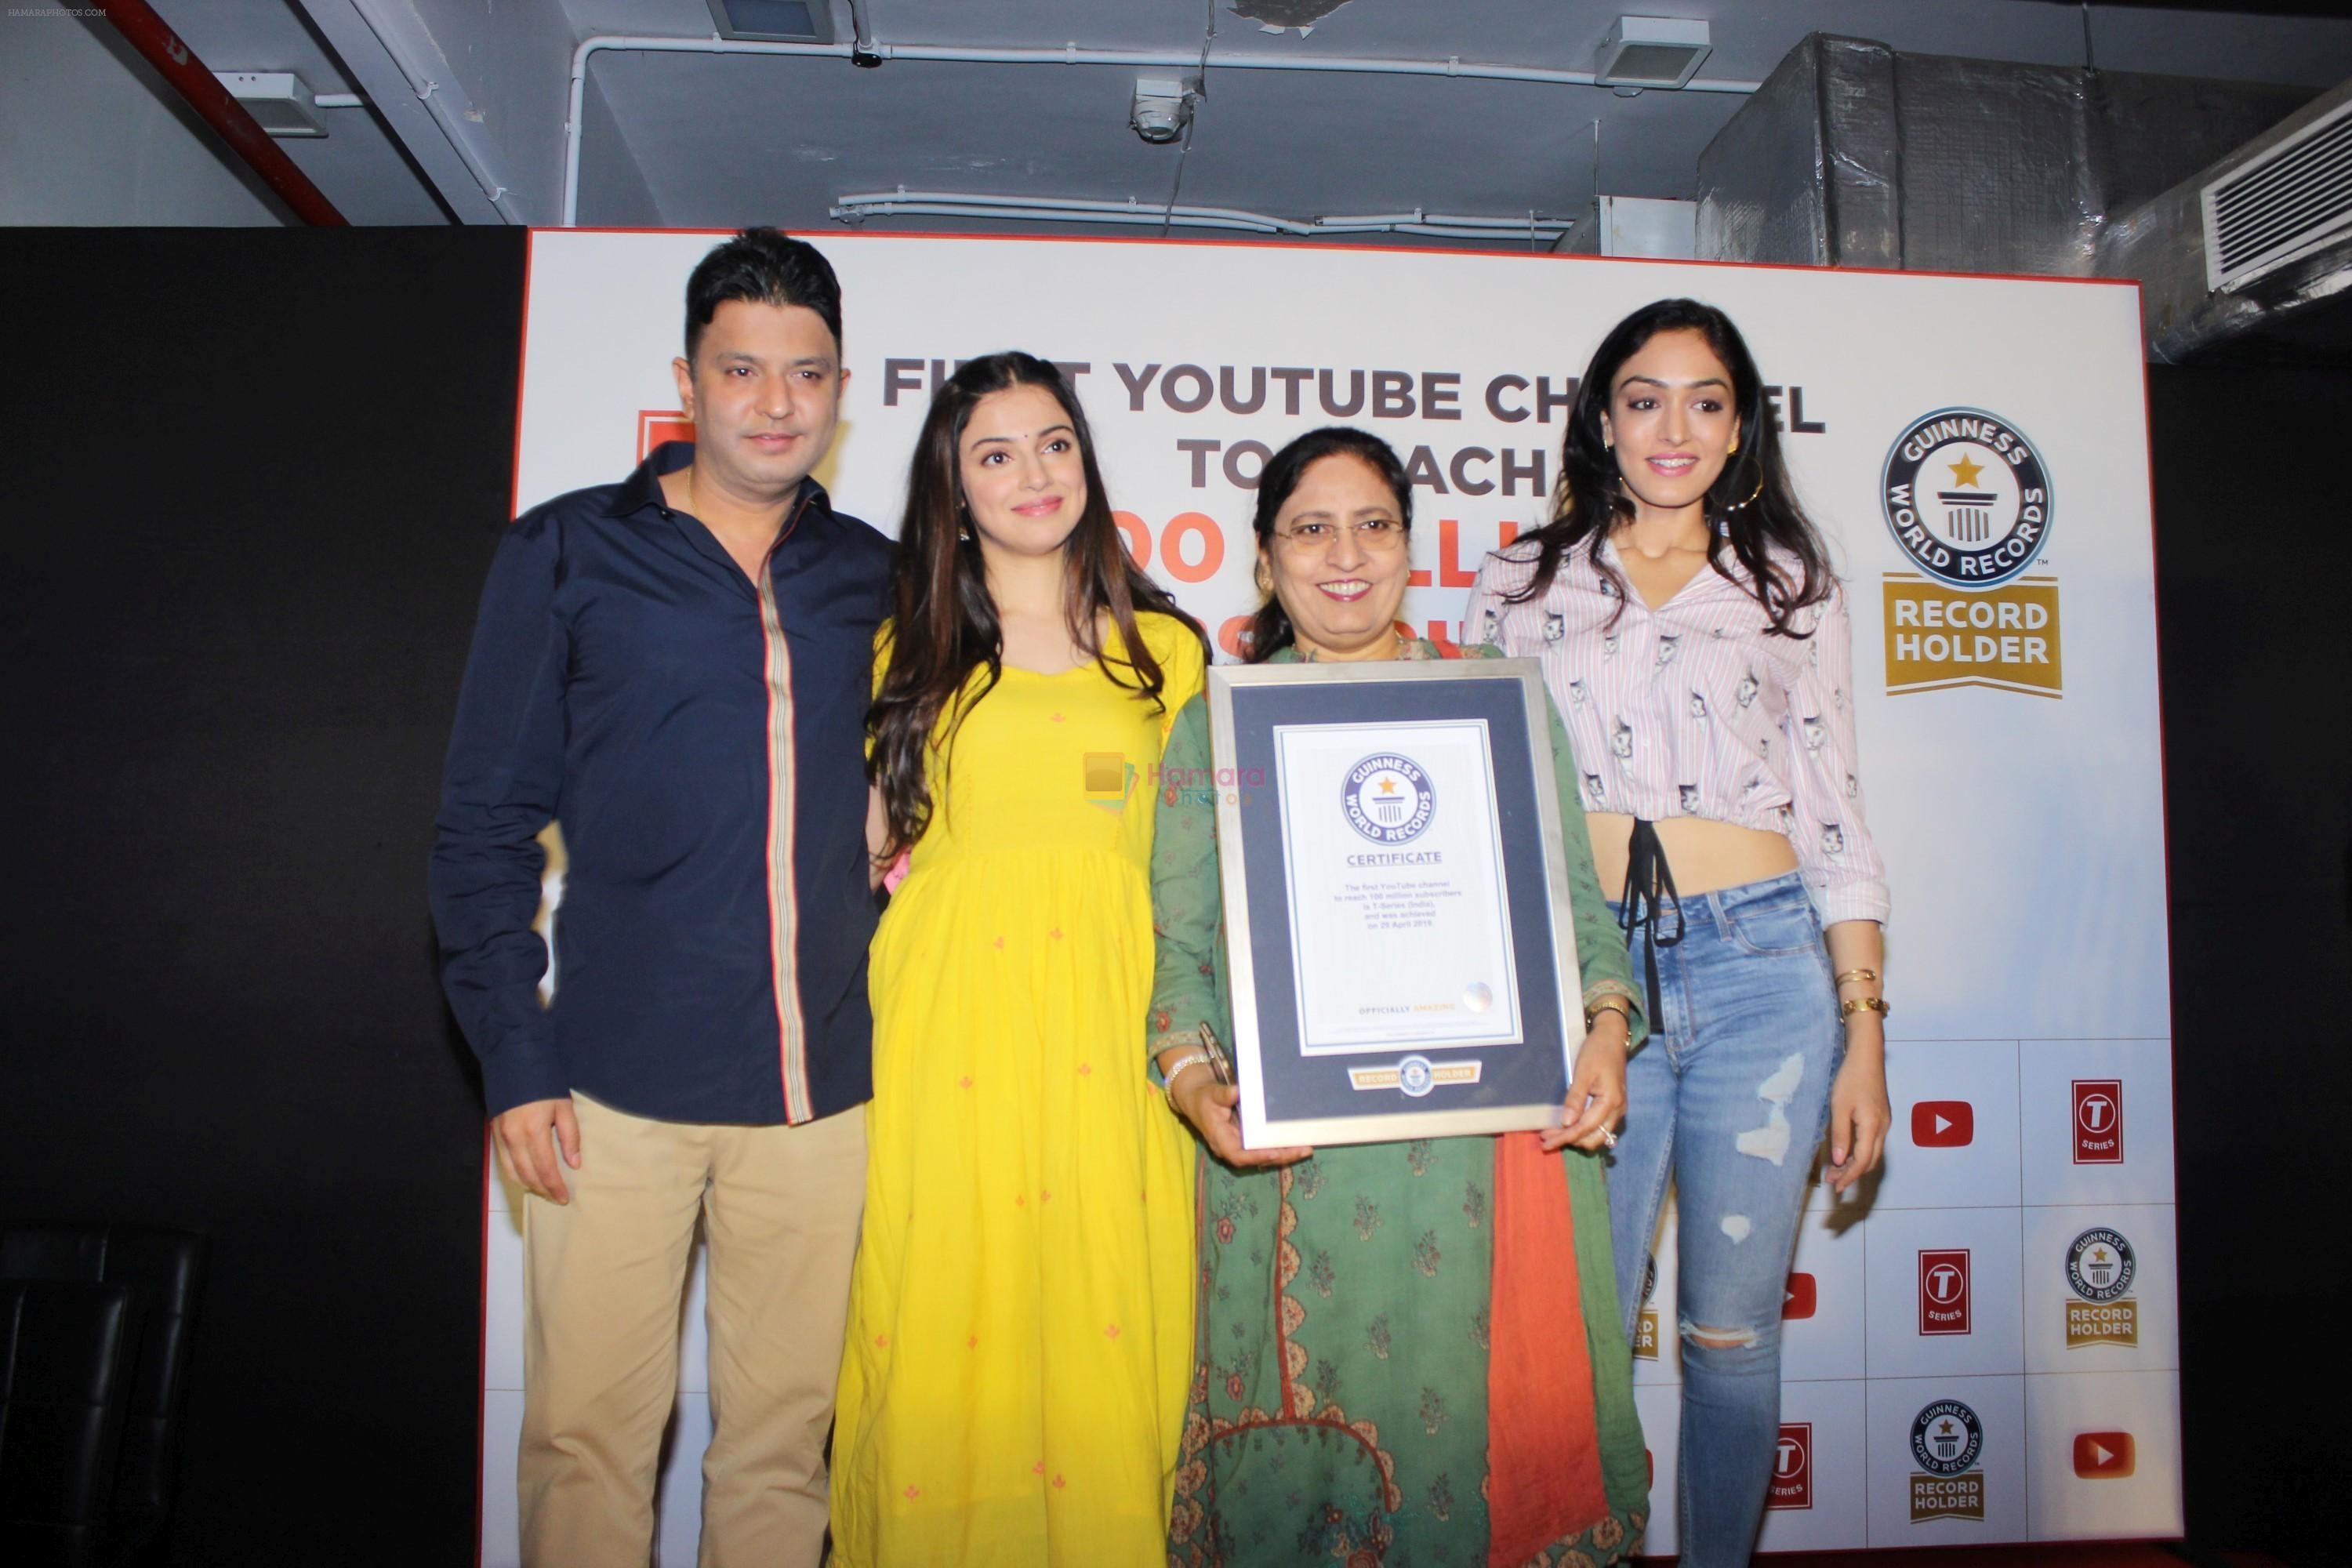 Divya Kumar , Bhushan Kumar has been felicitated with an official certificate from Guinness World Records as T-Series became the first YouTube channel to reach 100 million subscribers on 17th June 2019